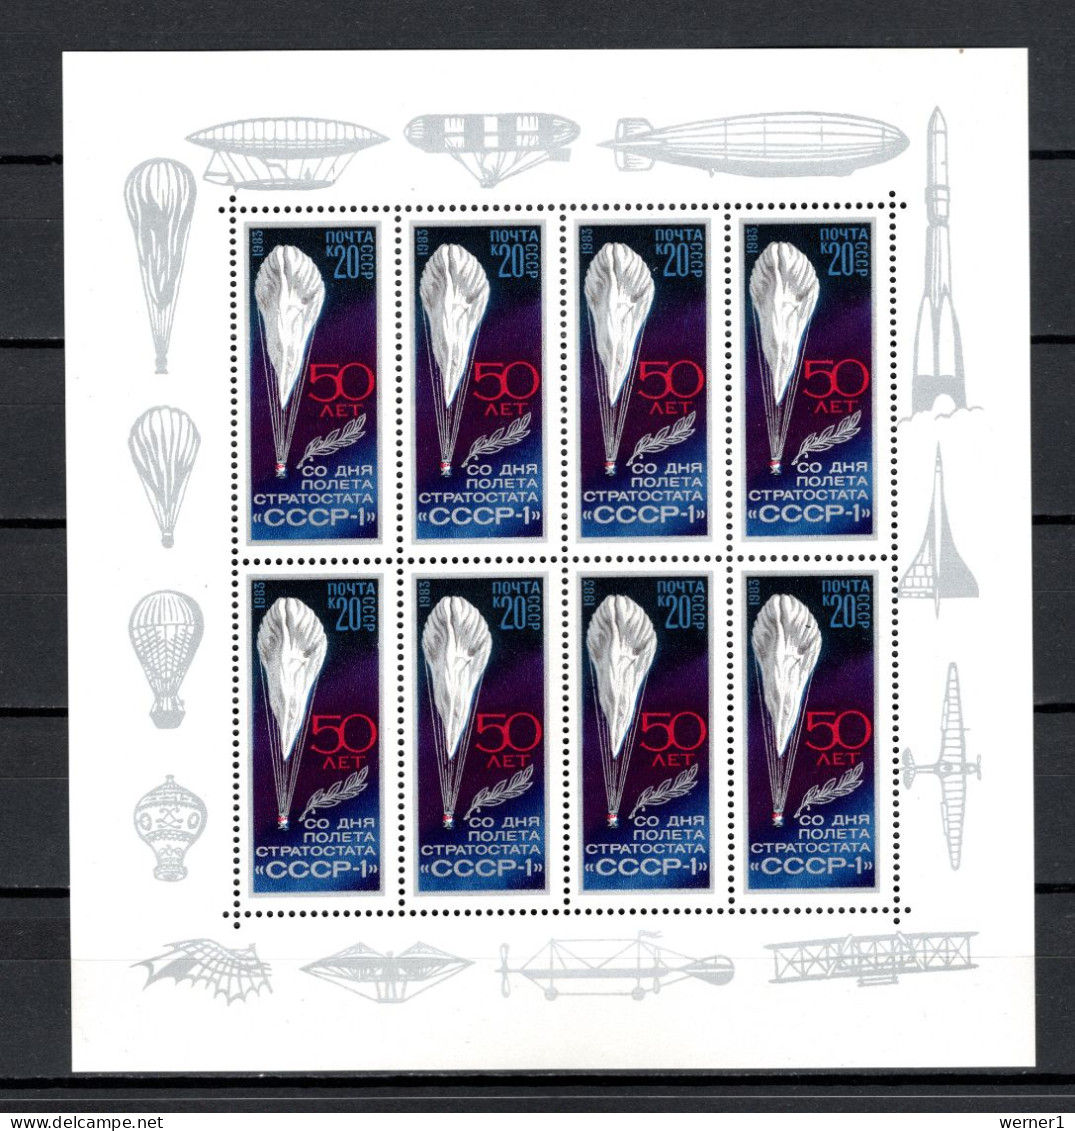 USSR Russia 1983 Space, Stratosphere Ballon Sheetlet MNH -scarce- - Russie & URSS